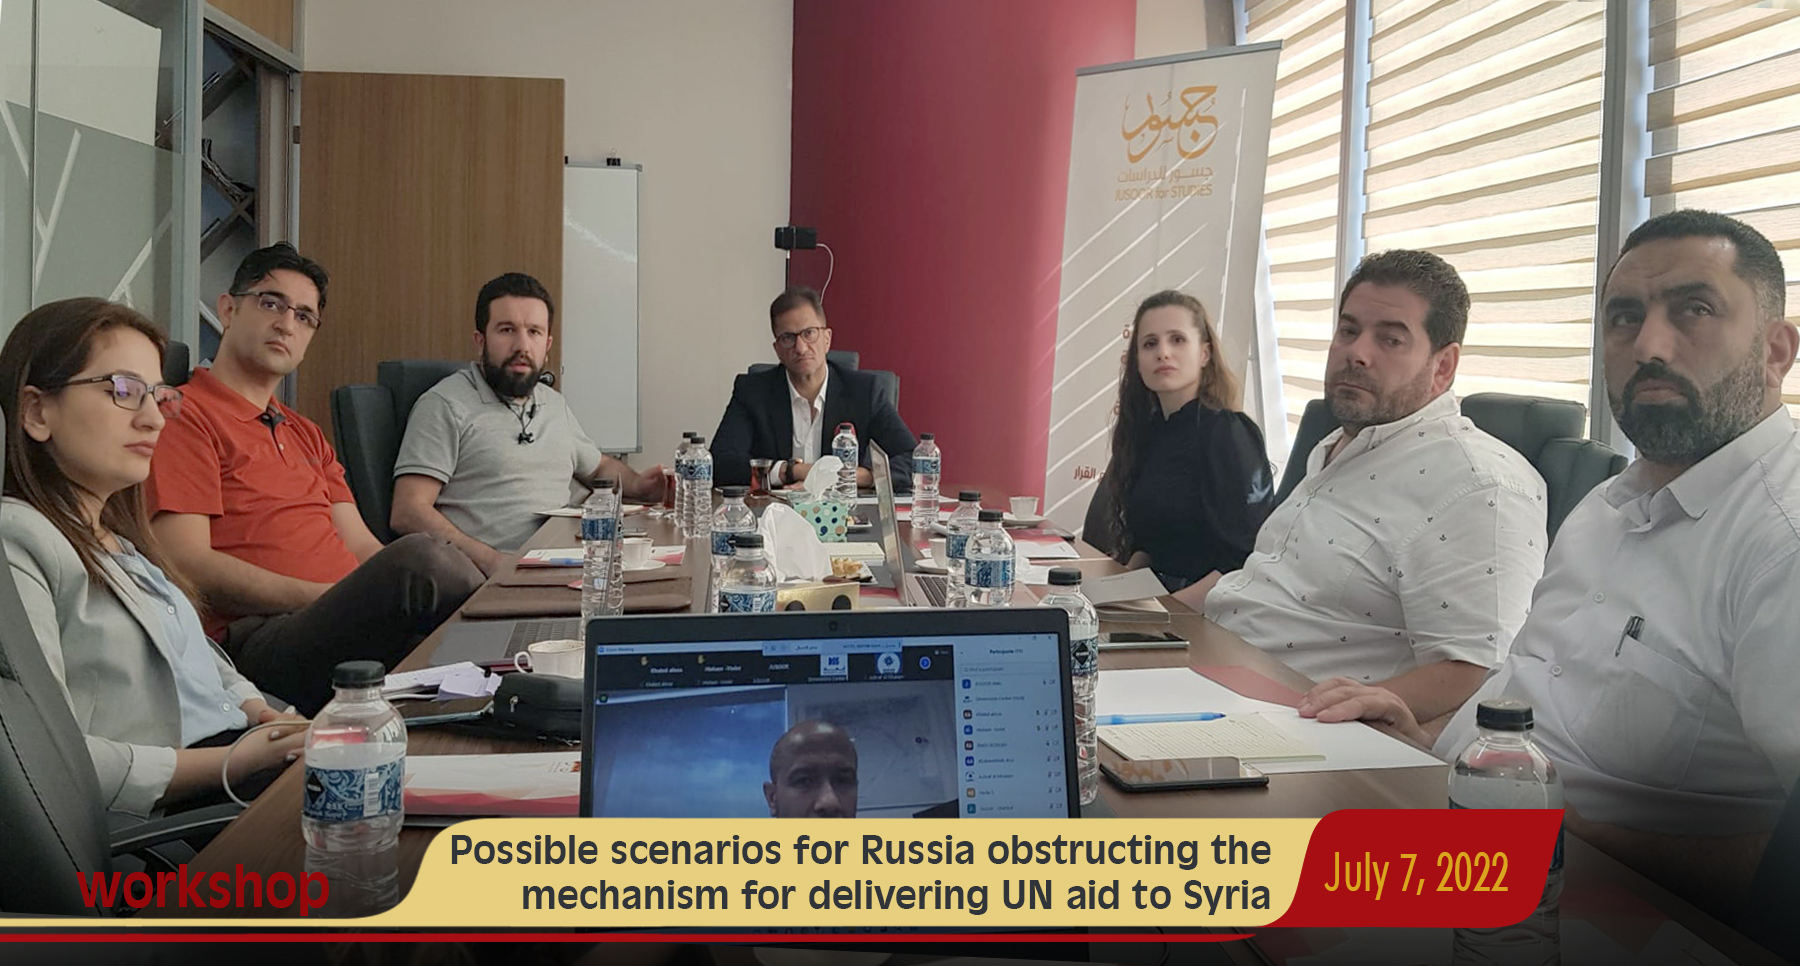 Possible scenarios for Russia obstructing the mechanism for delivering UN aid to Syria